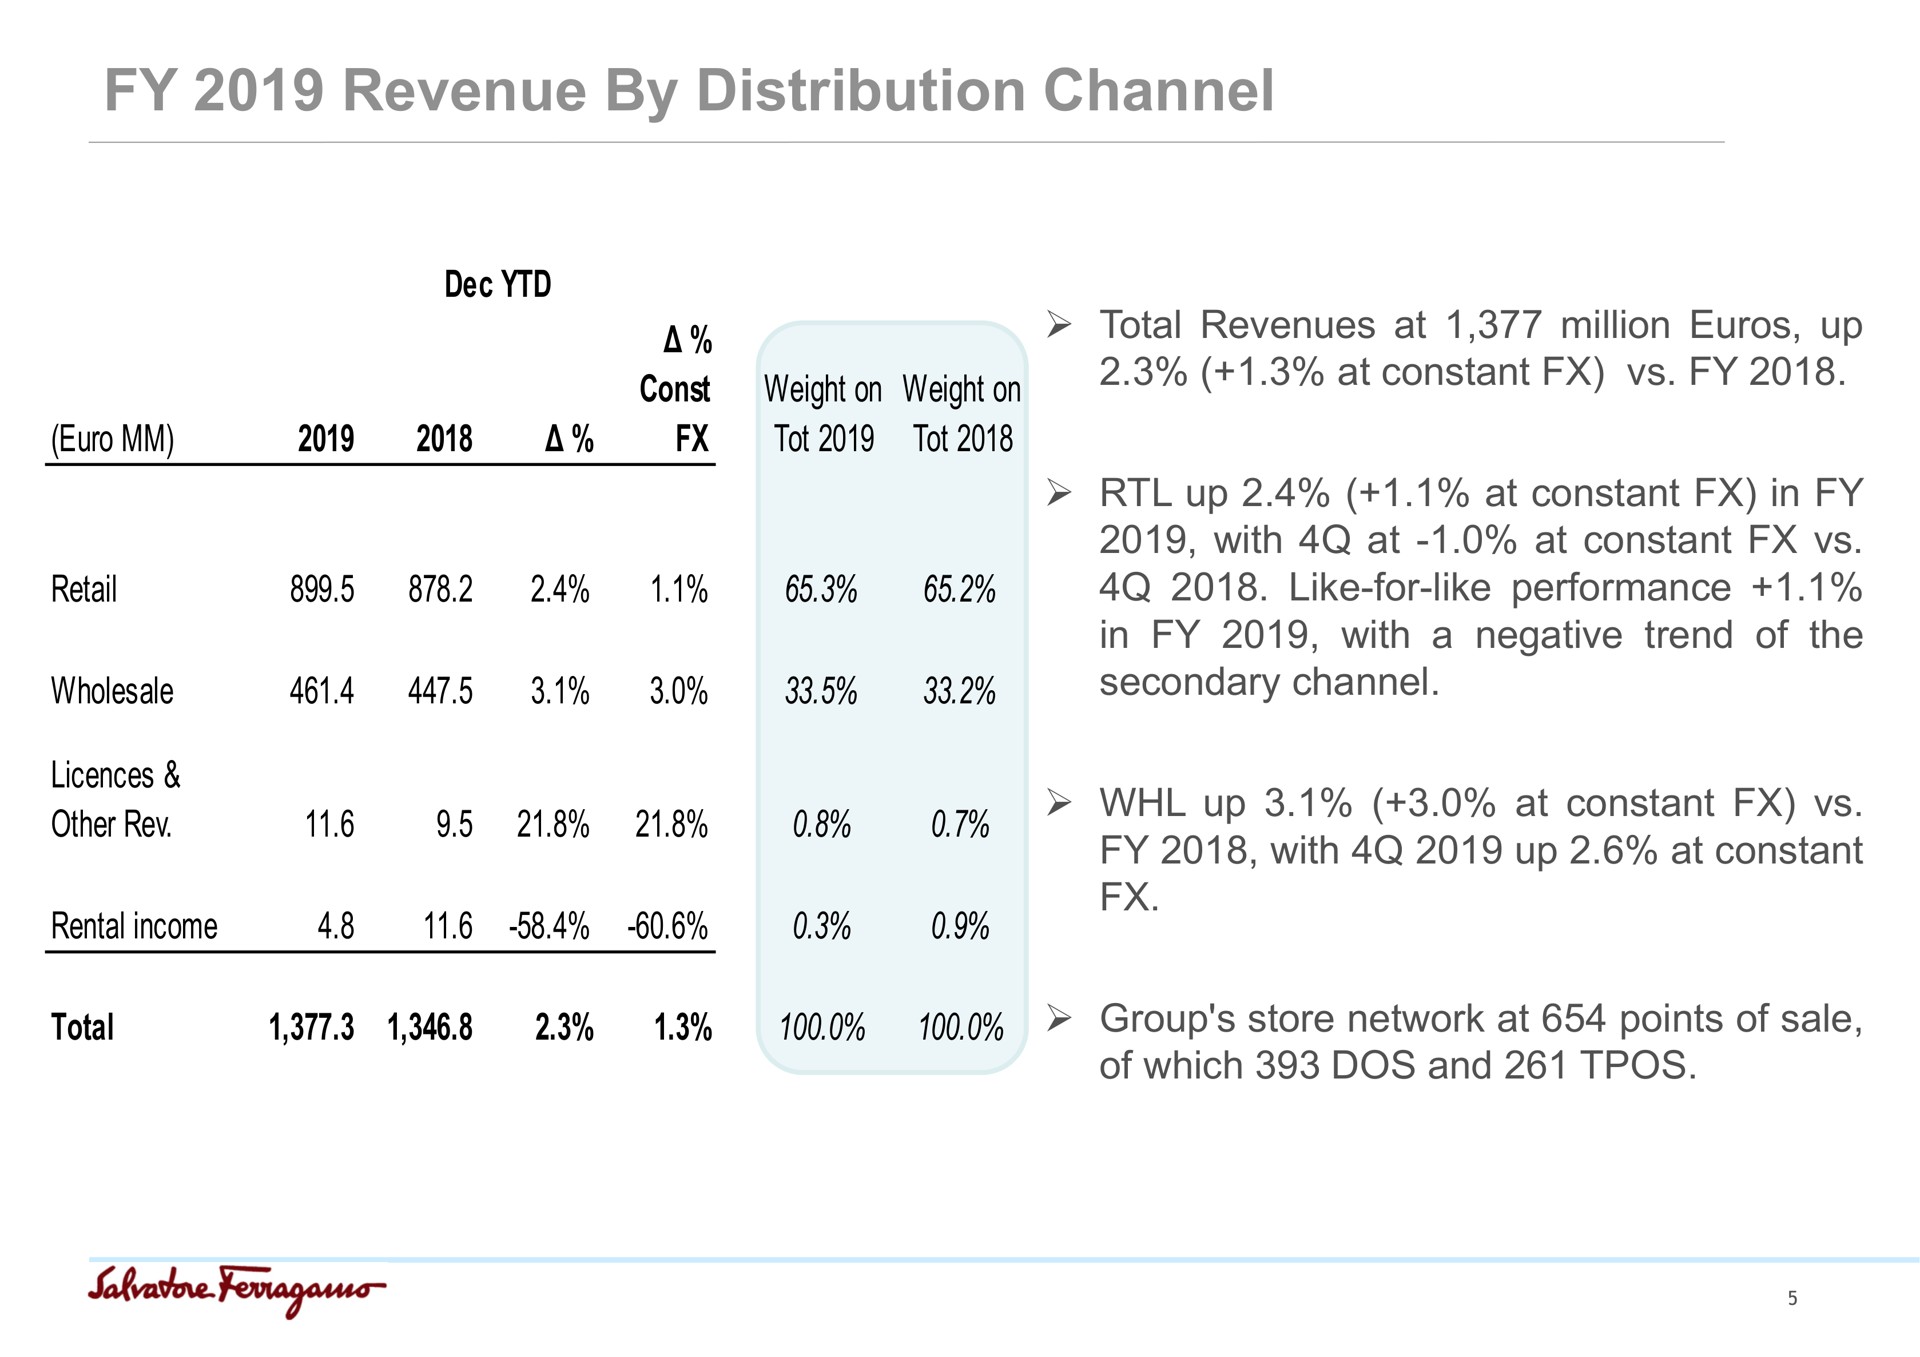 revenue by distribution channel weight on tot weight on tot retail wholesale other rev rental income total revenues at million up at constant up at constant in with at at constant like for like performance in with a negative trend of the secondary channel up at constant with up at constant total group store network at points of sale of which dos and | Salvatore Ferragamo